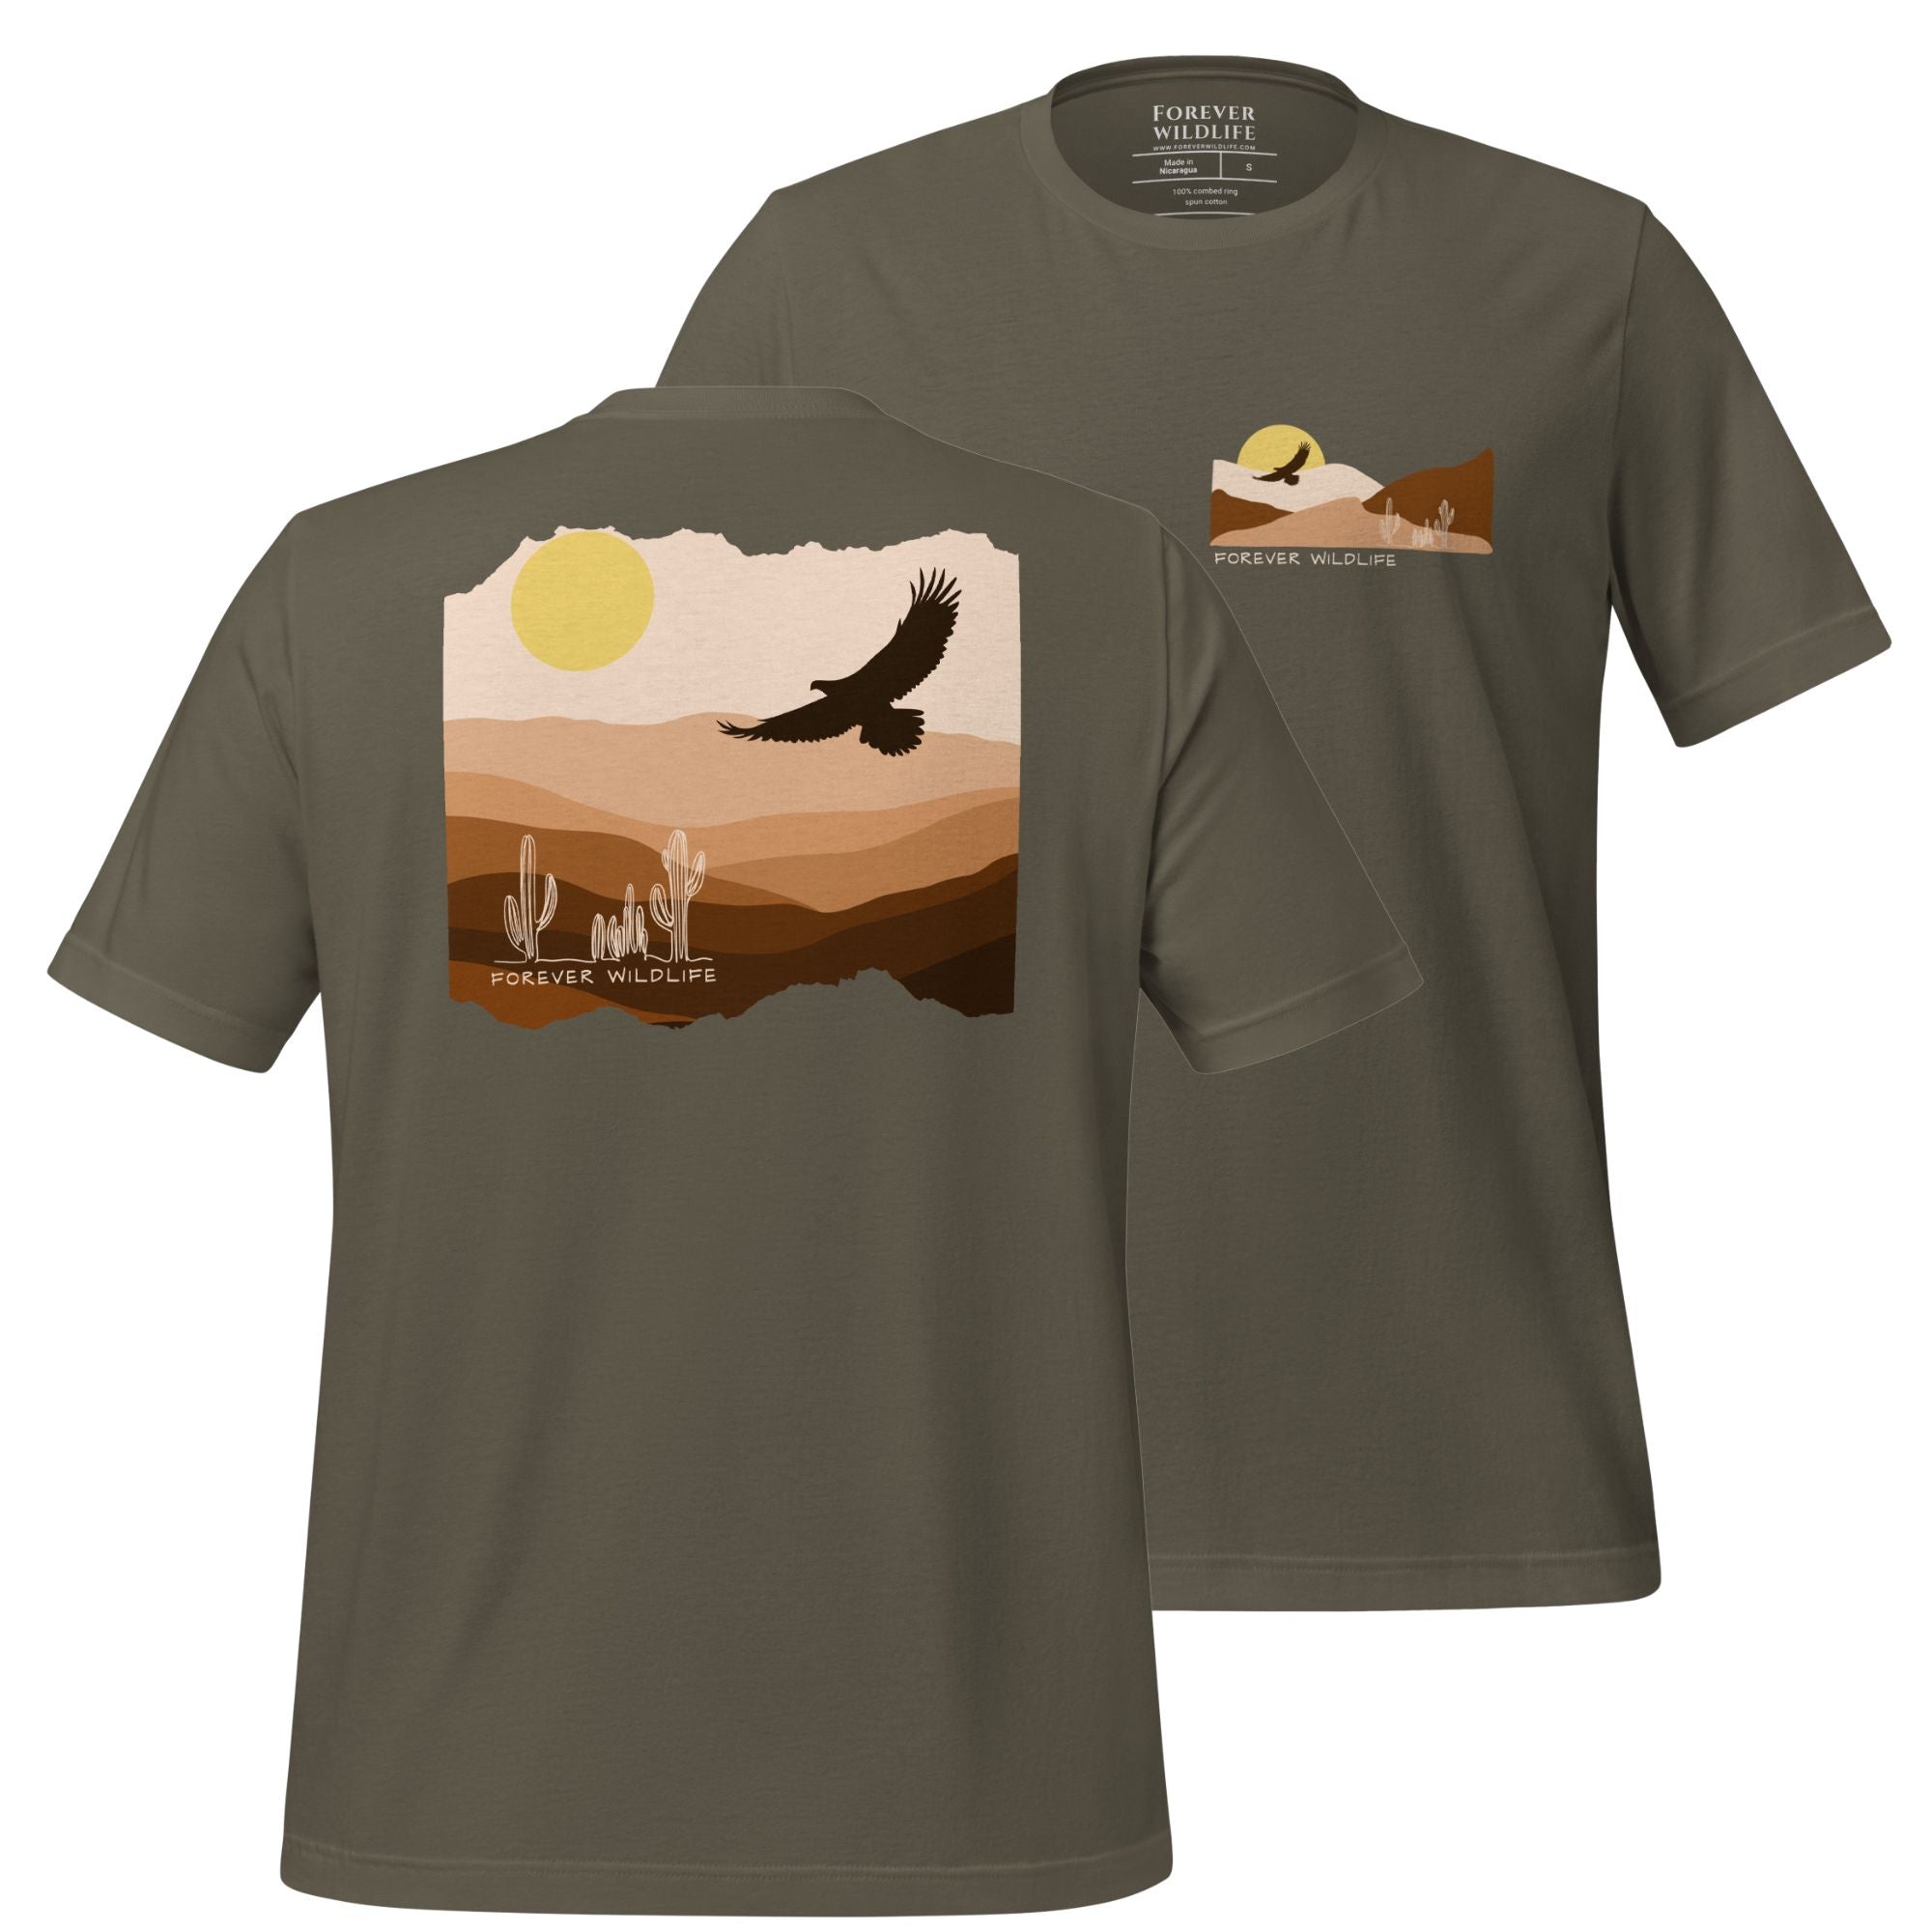 Eagle T-shirt, beautiful army Eagle t-shirt with eagle soaring over the desert part of Wildlife tshirts collection.